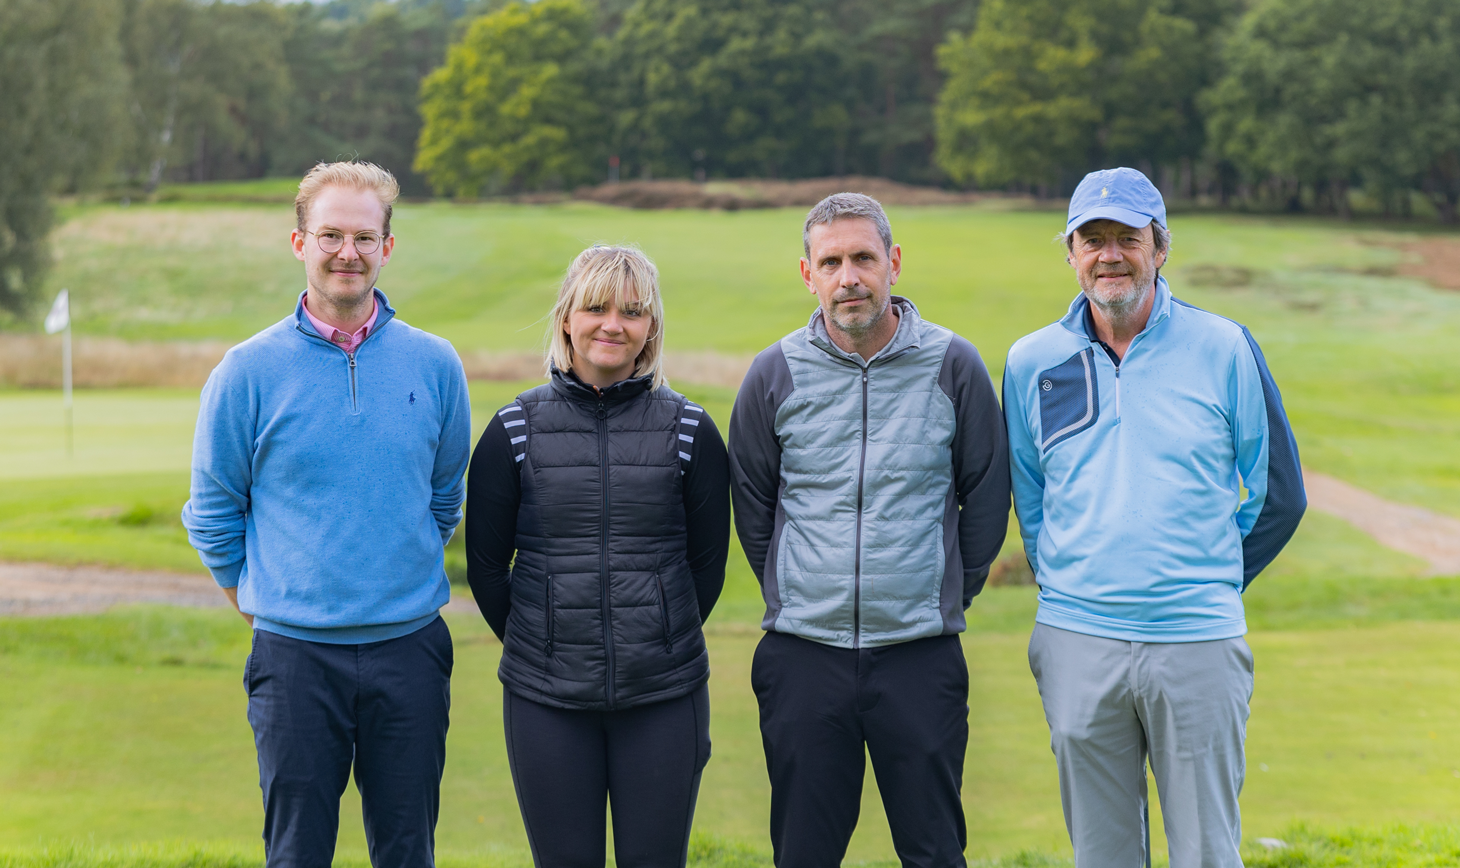 RGS Professionals Charity Golf Day 2022